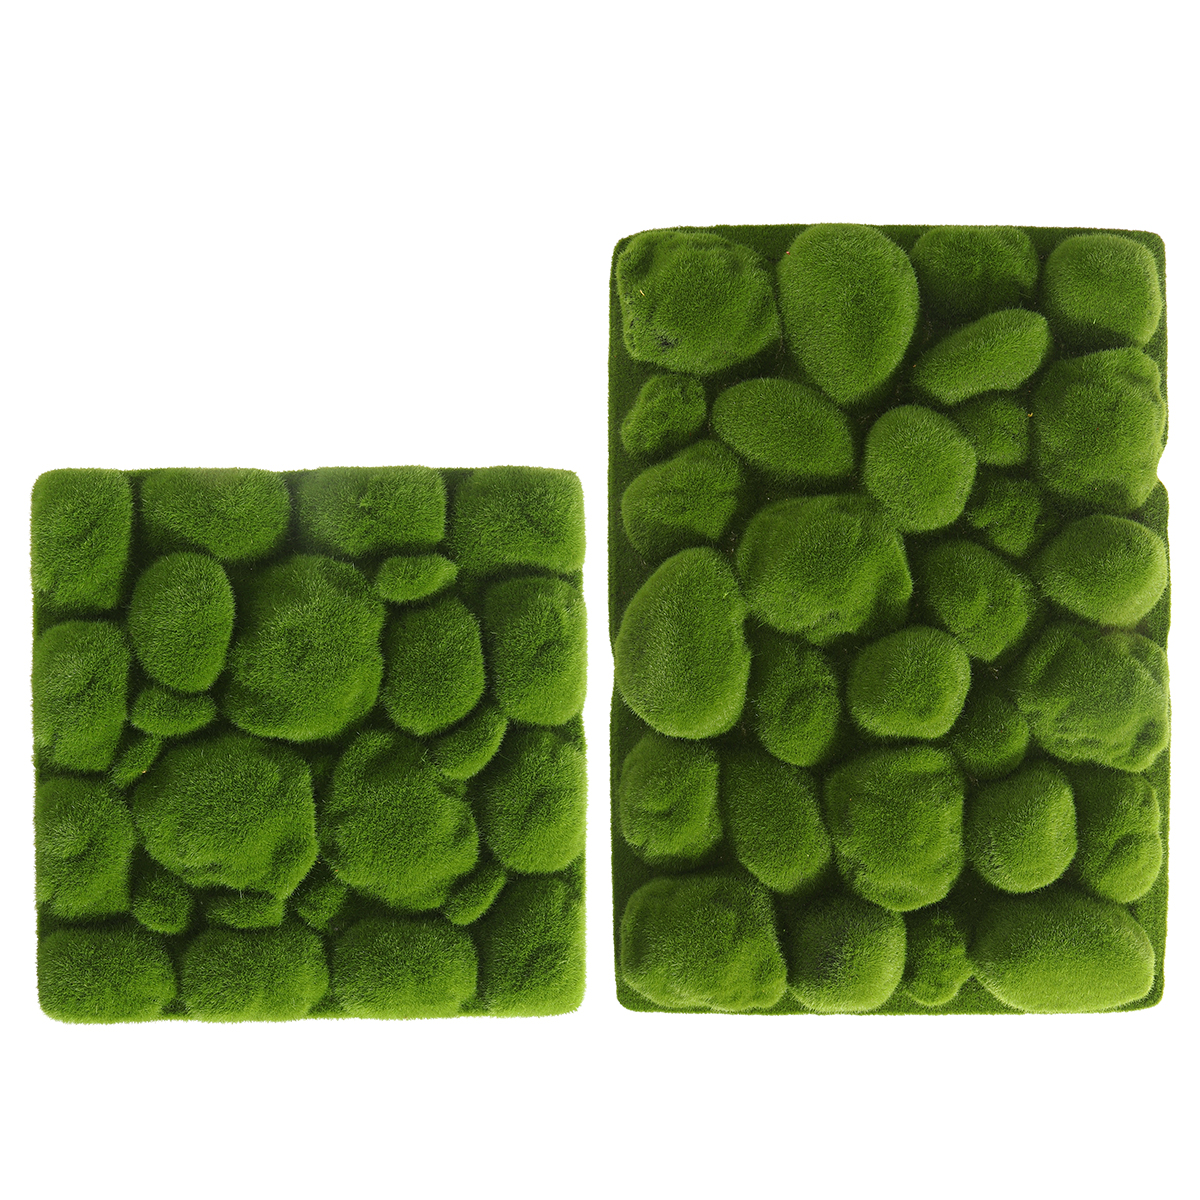 Artificial-Topiary-Hedges-Panels-Plastic-Faux-Shrubs-Fence-Mat-Greenery-Wall-Backdrop-Decor-Garden-P-1955507-4